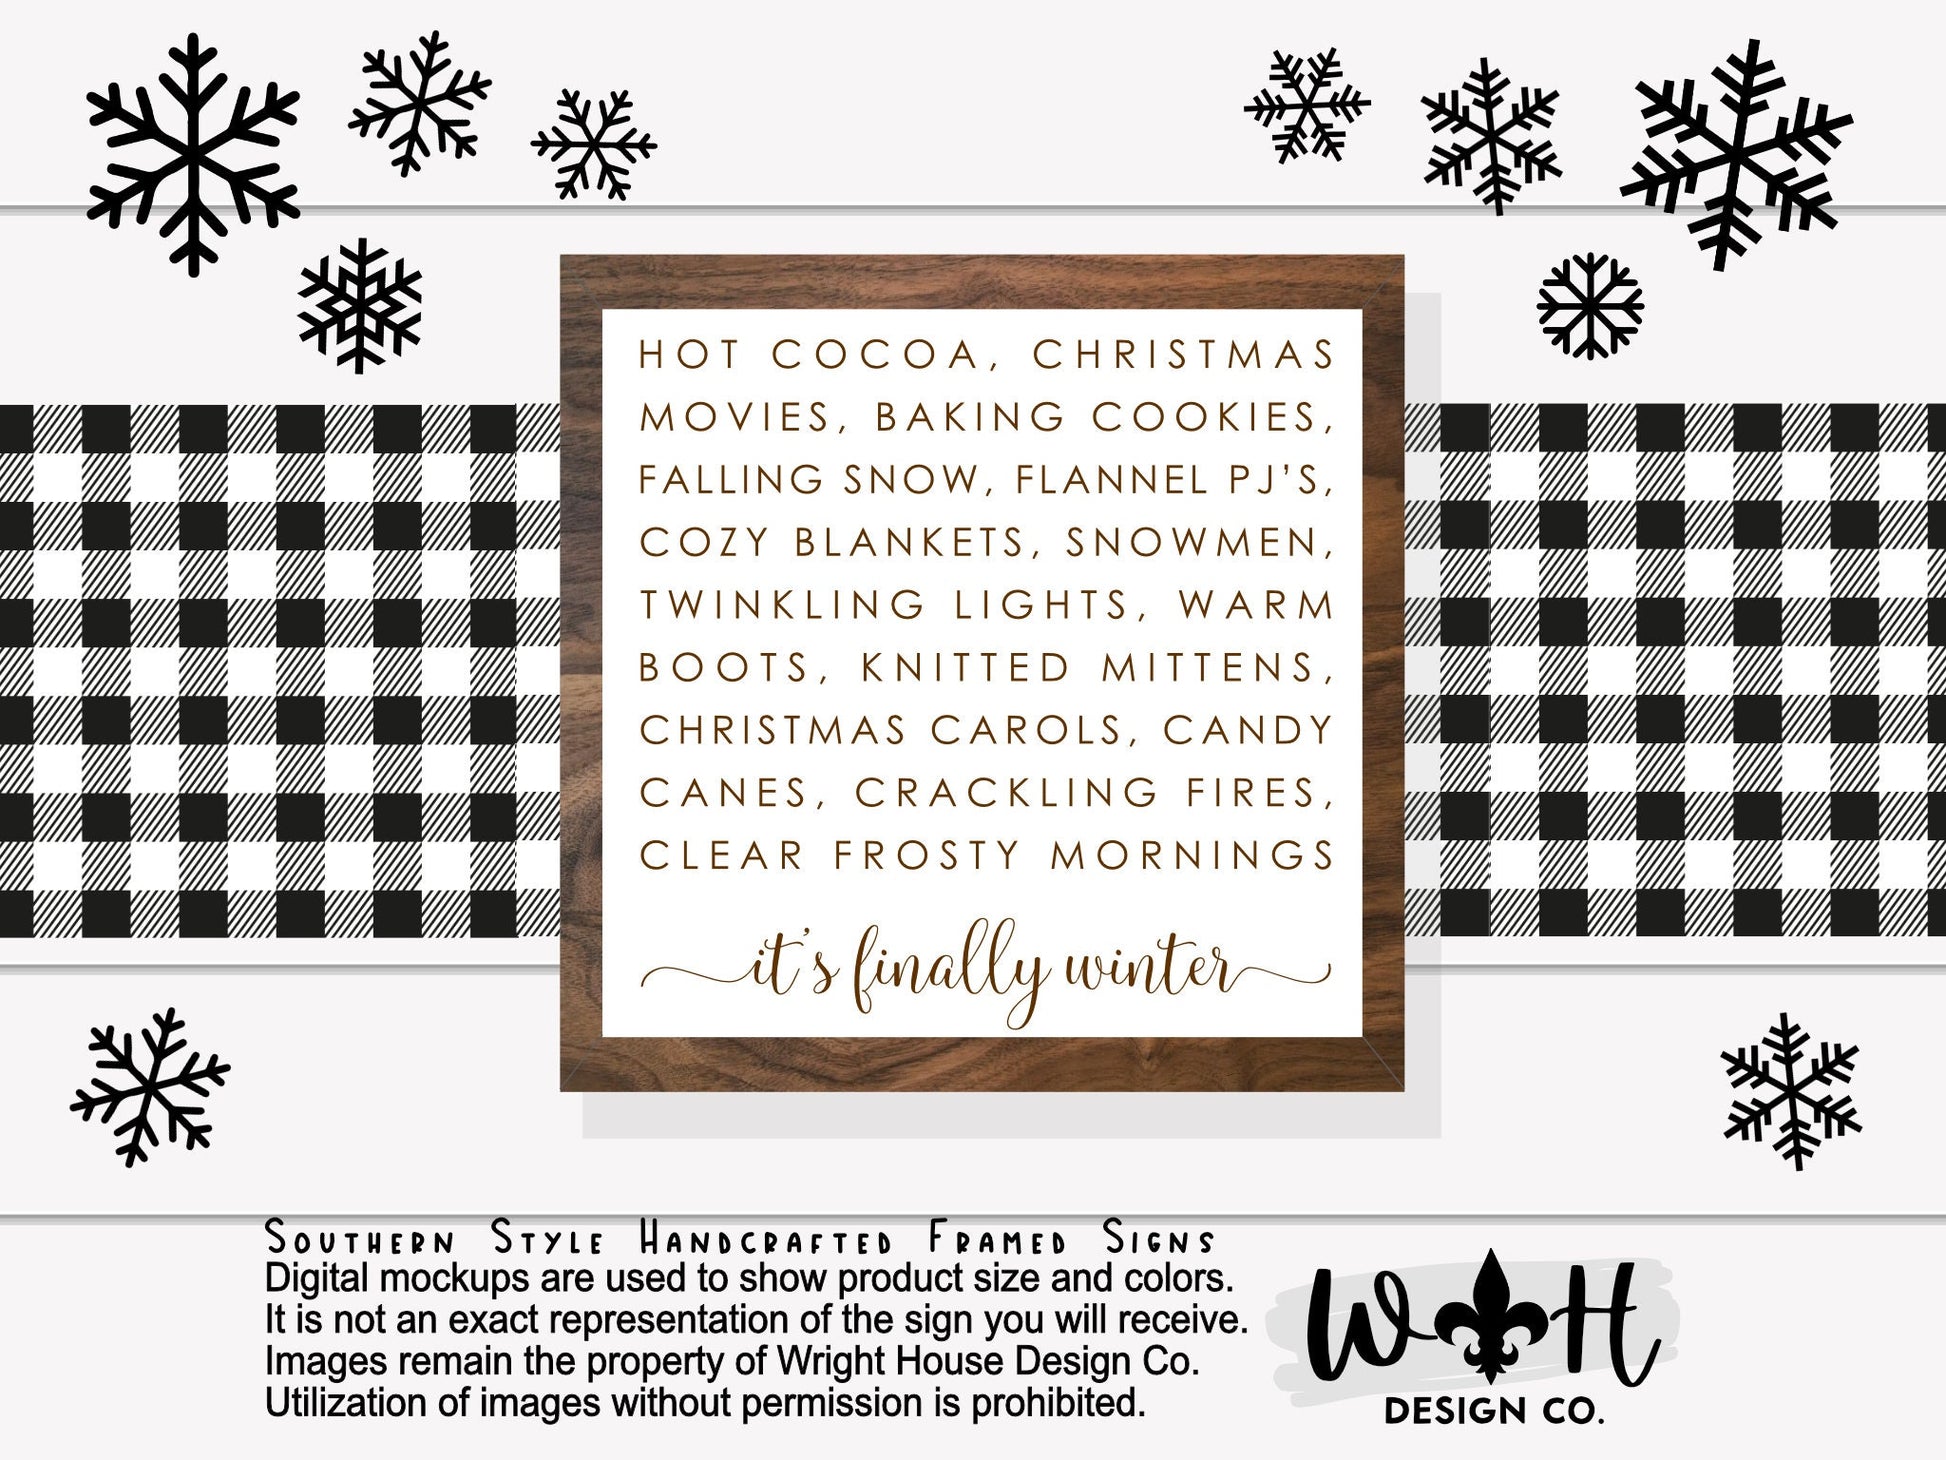 It’s Finally Winter Checklist - Coffee Bar Sign - Seasonal Home and Kitchen Decor - Handcrafted Wooden Framed Wall Art - Holiday Decorations